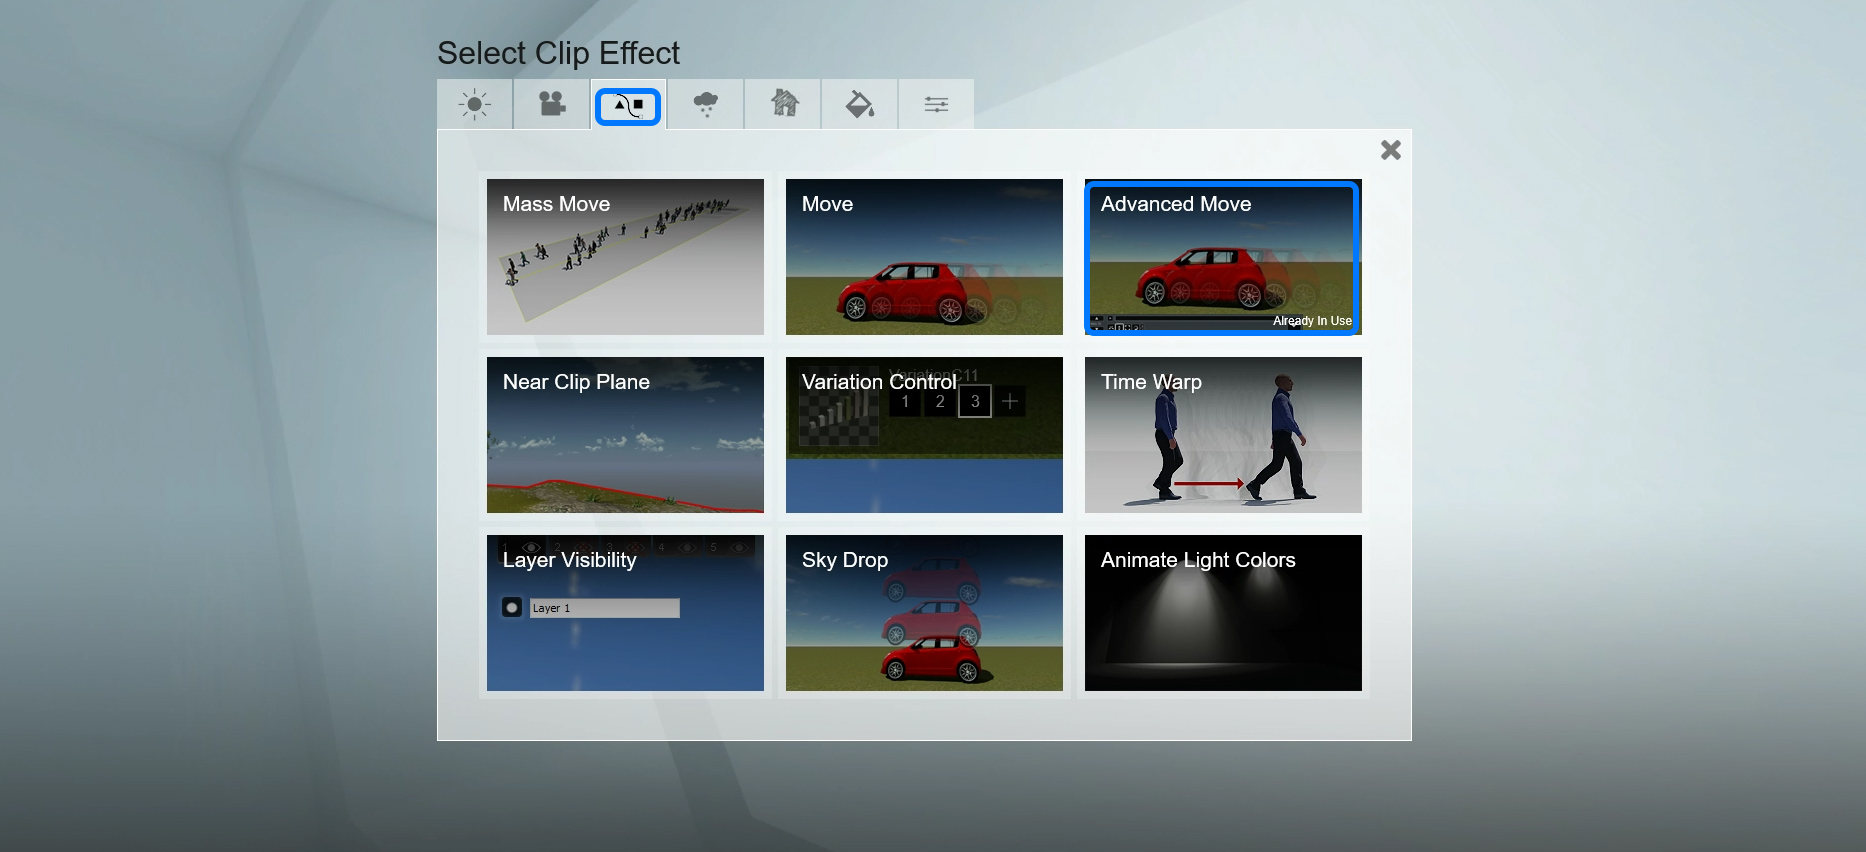 It demonstrates the various video clip effects.